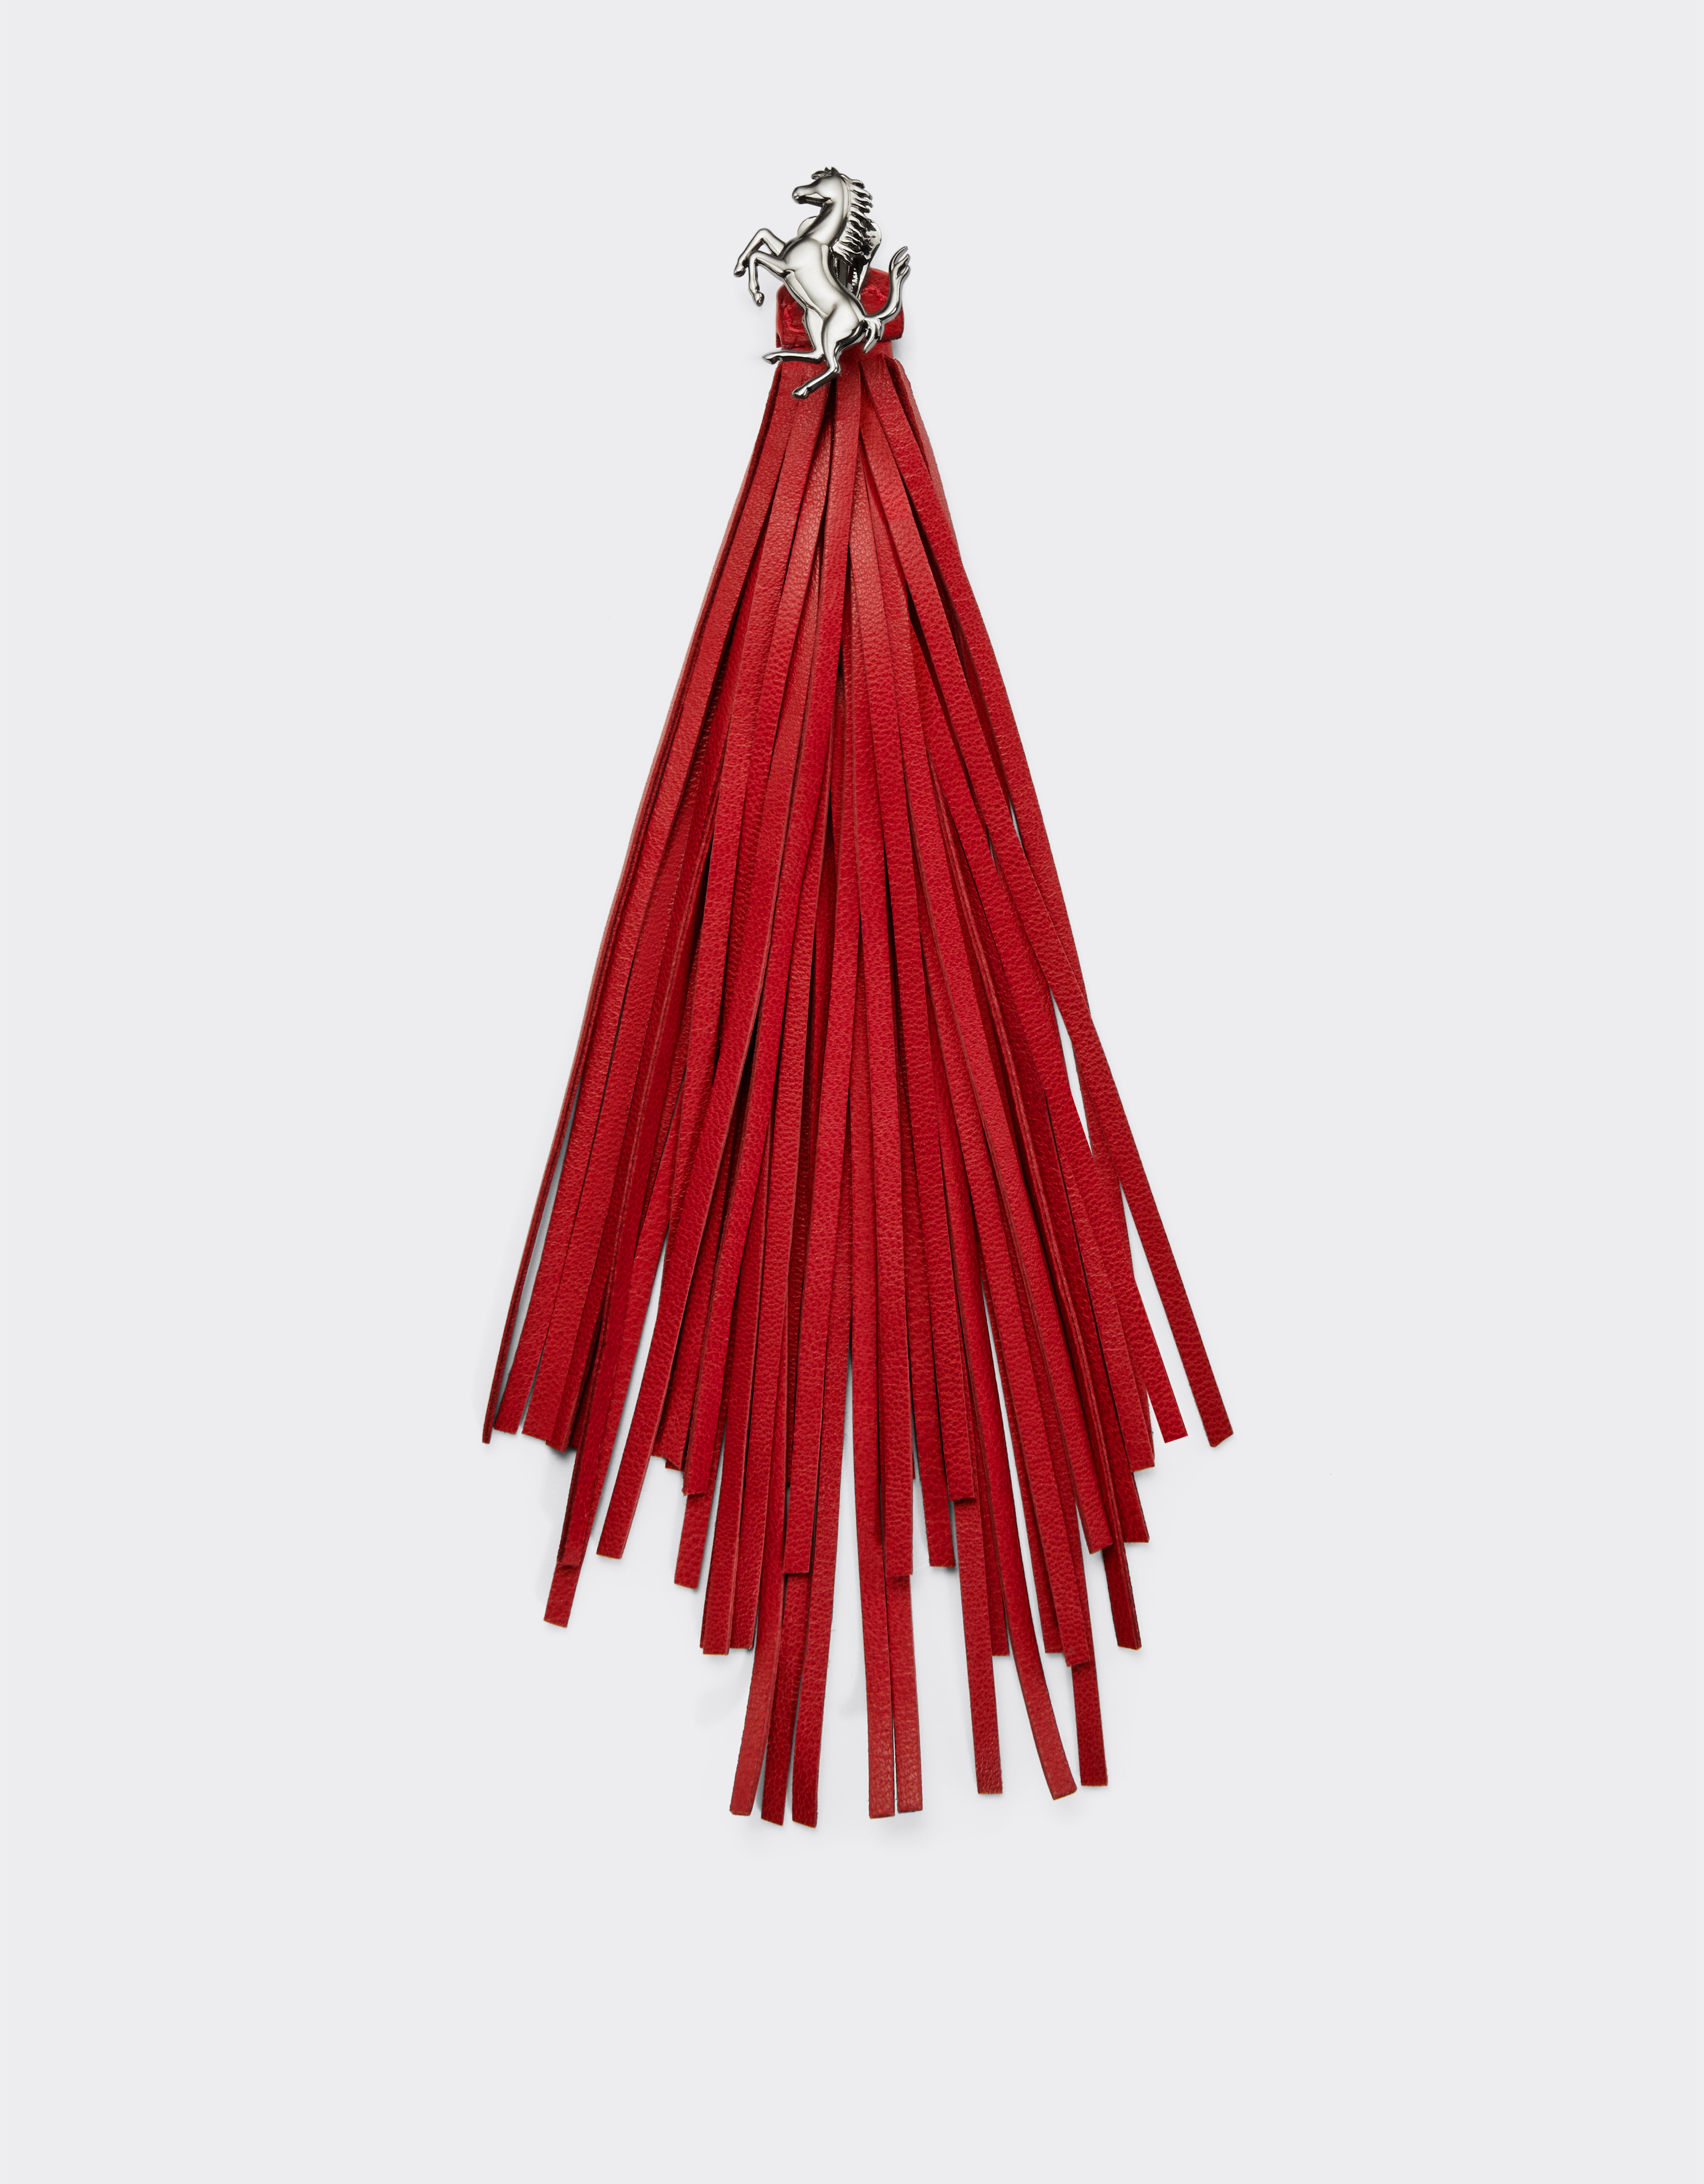 Shop Ferrari Earrings With Prancing Horse Detail And Leather Tassel In Rosso Dino